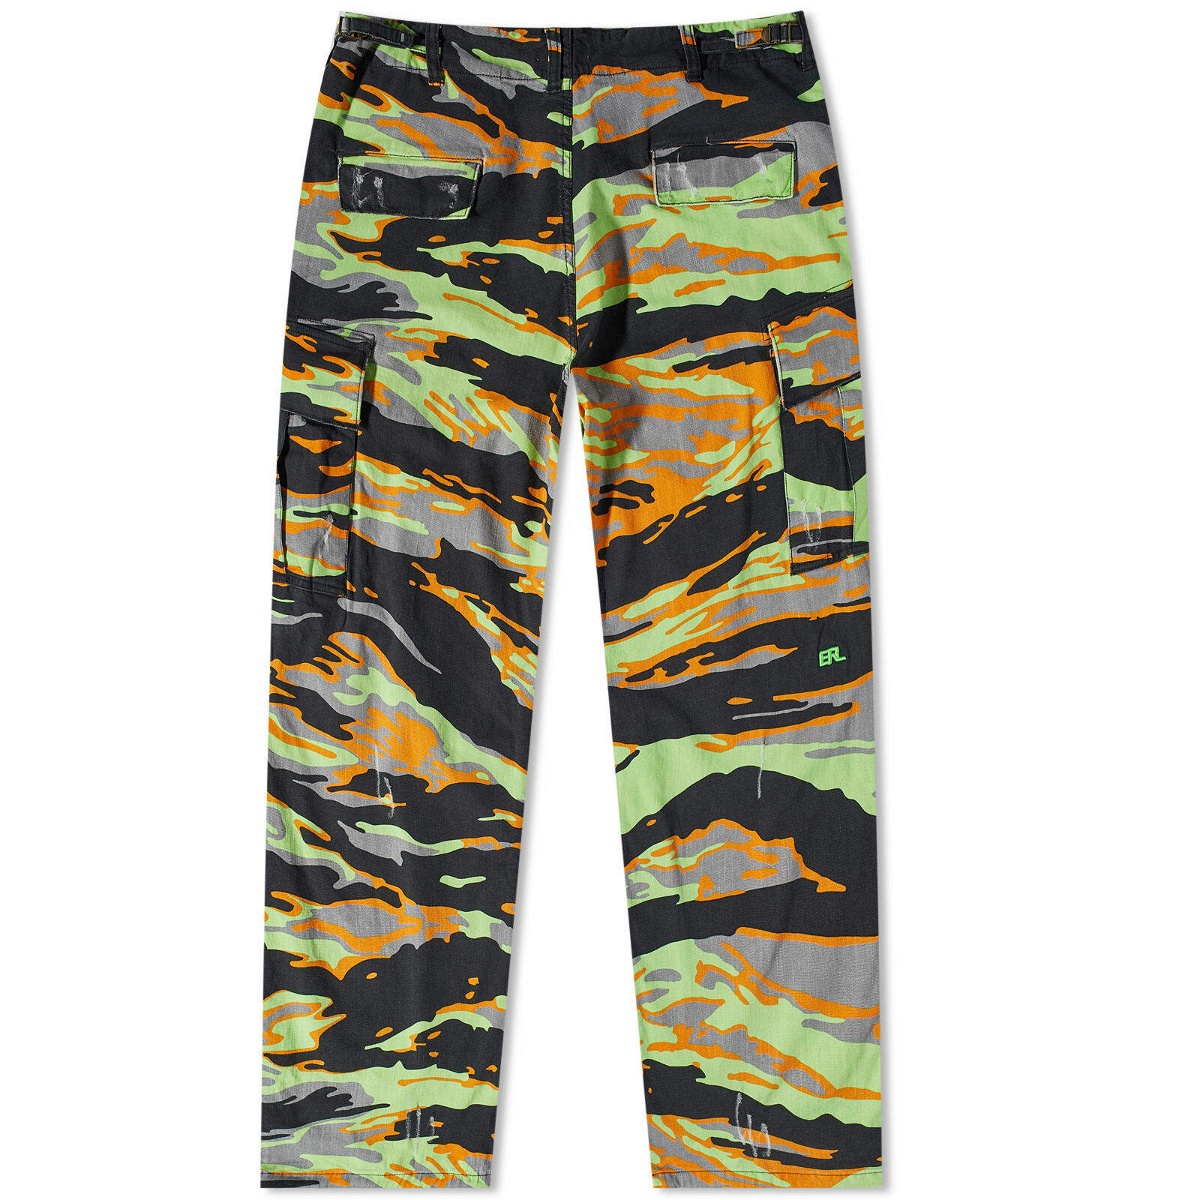 ERL Camo Pant in Green Rave Camo ERL